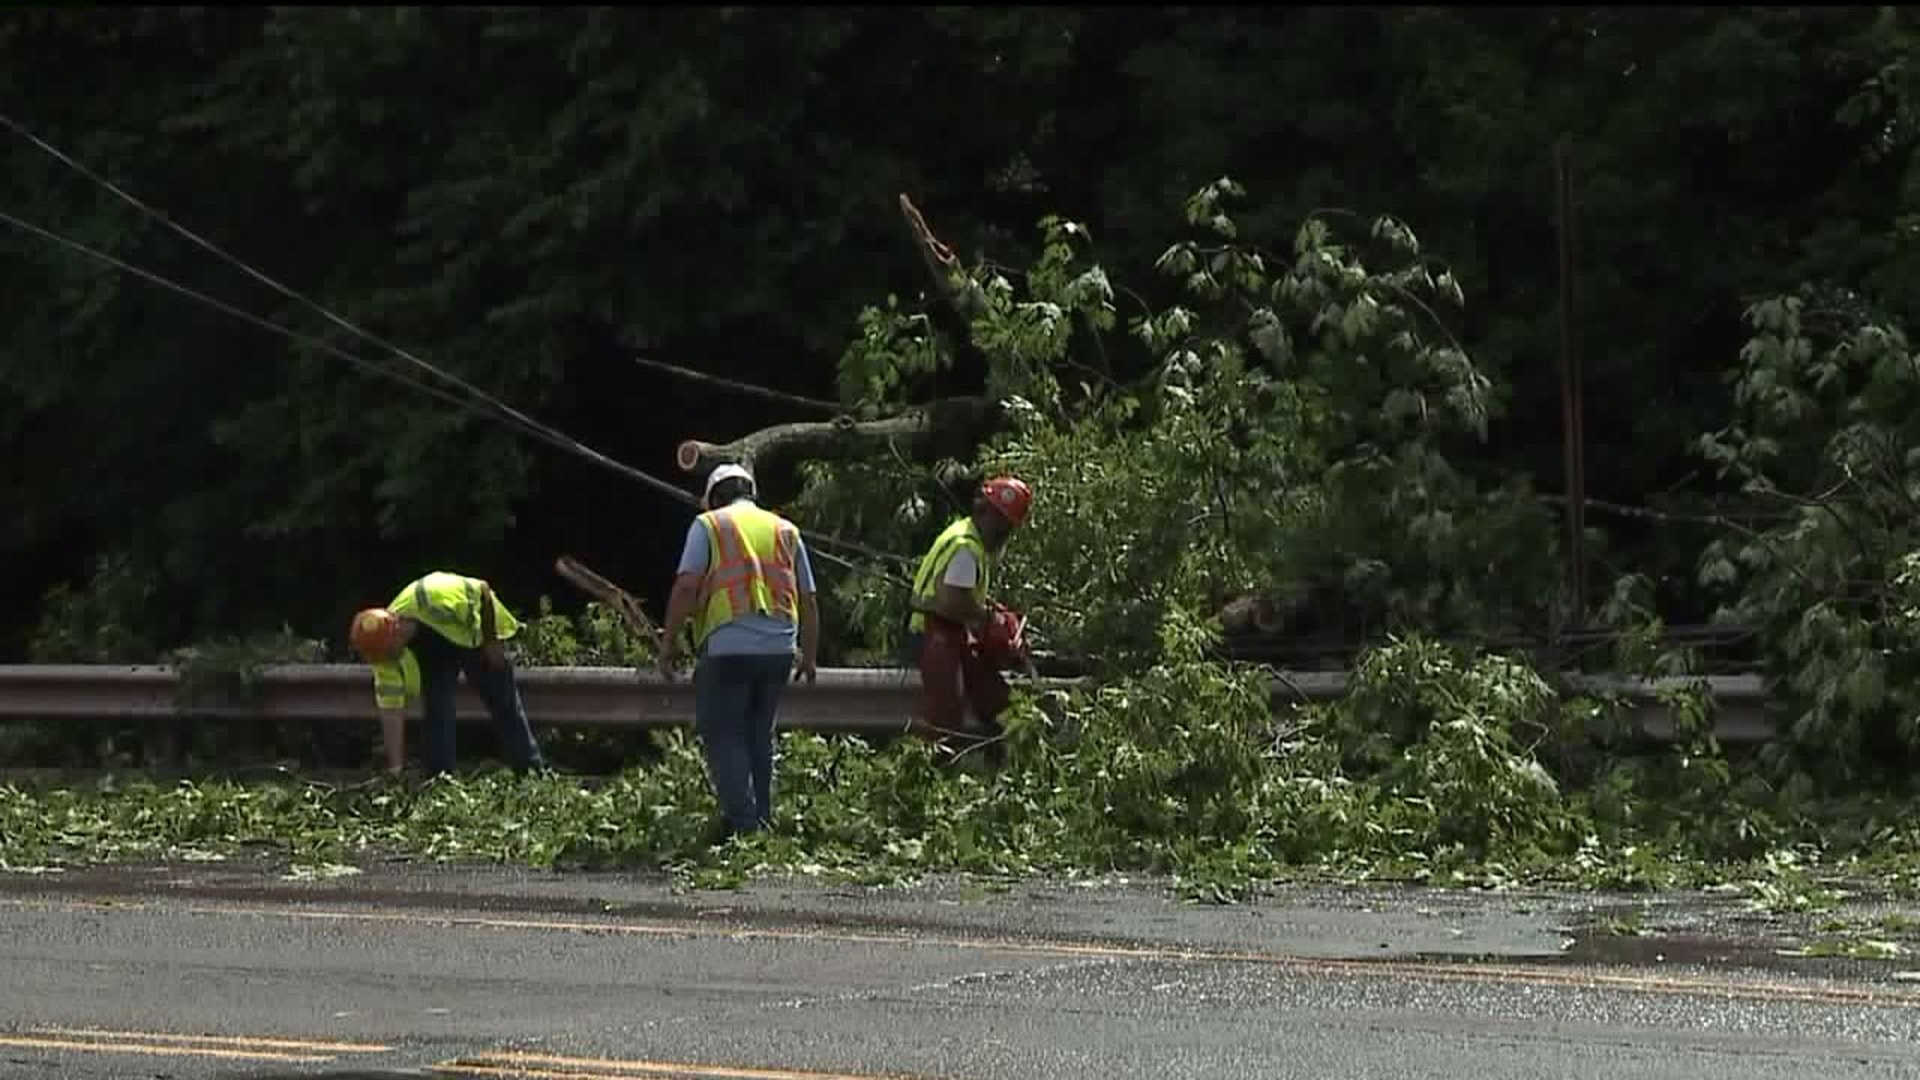 Fallen Tree Disables Traffic Lights in Luzerne County